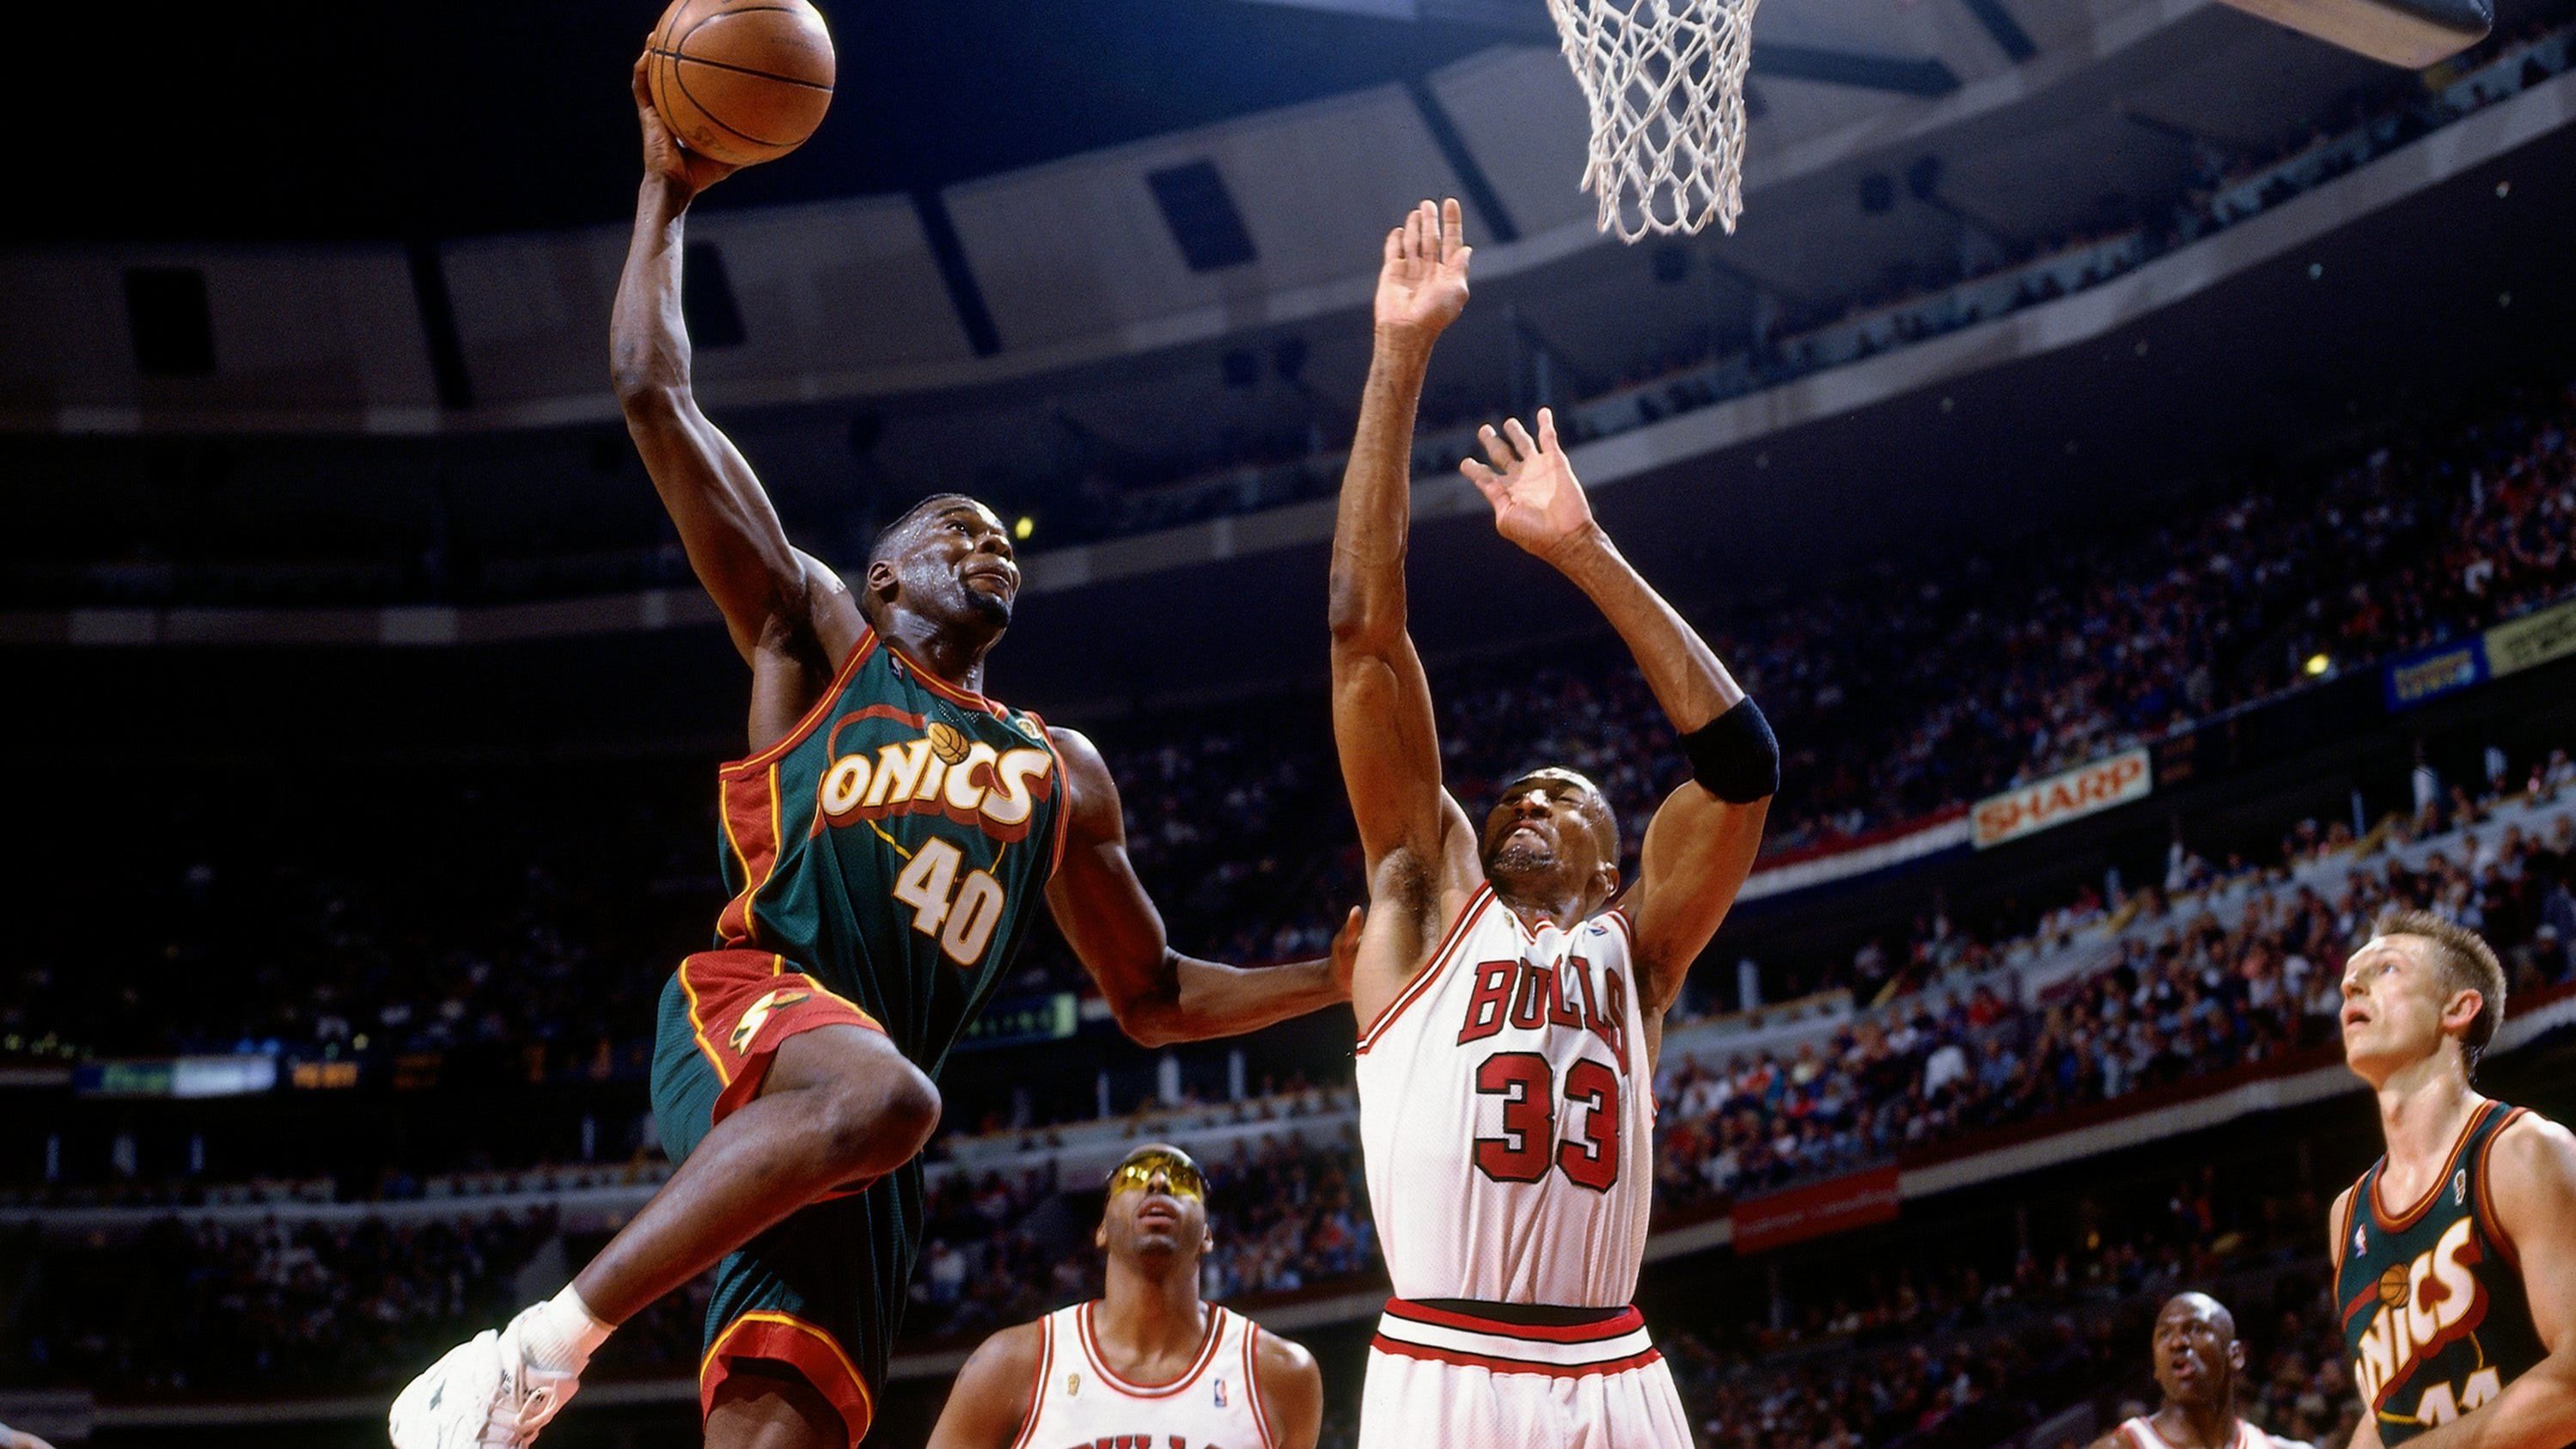 Former NBA star Shawn Kemp arrested following drive-by shooting